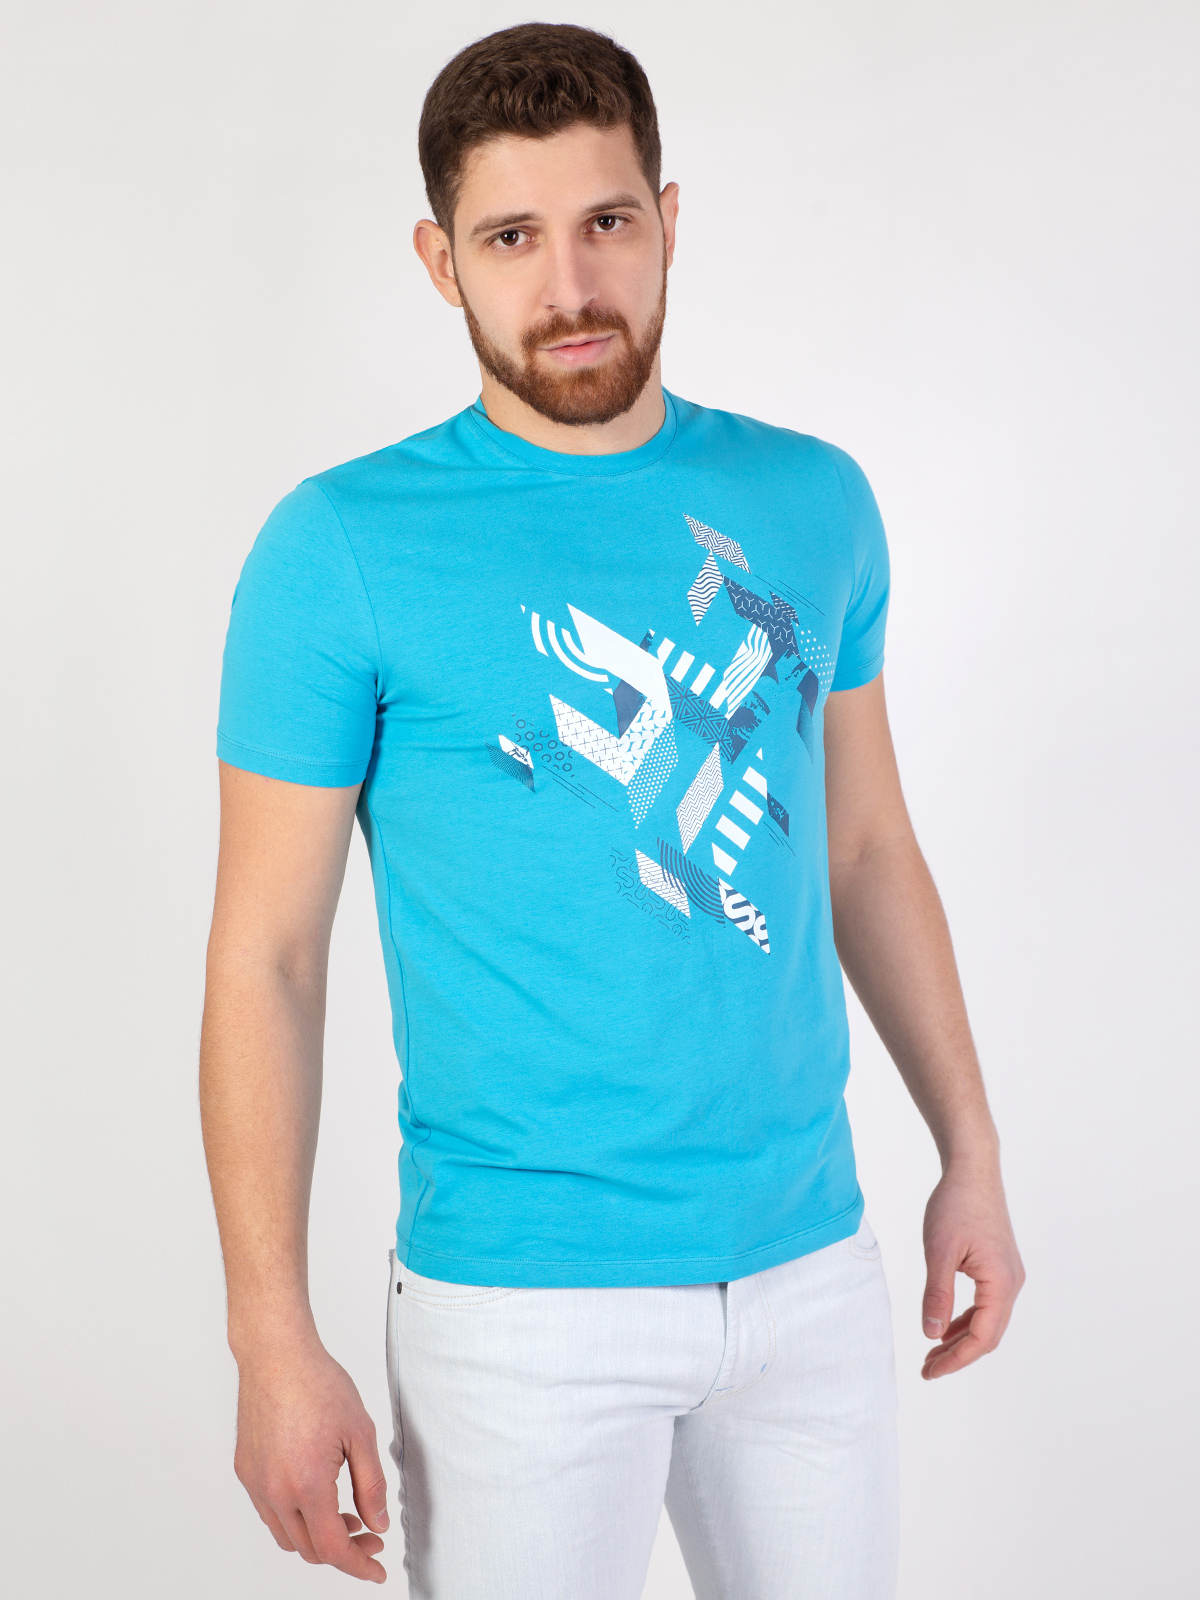 Blue tshirt with print in white and bl - 96400 € 16.31 img3